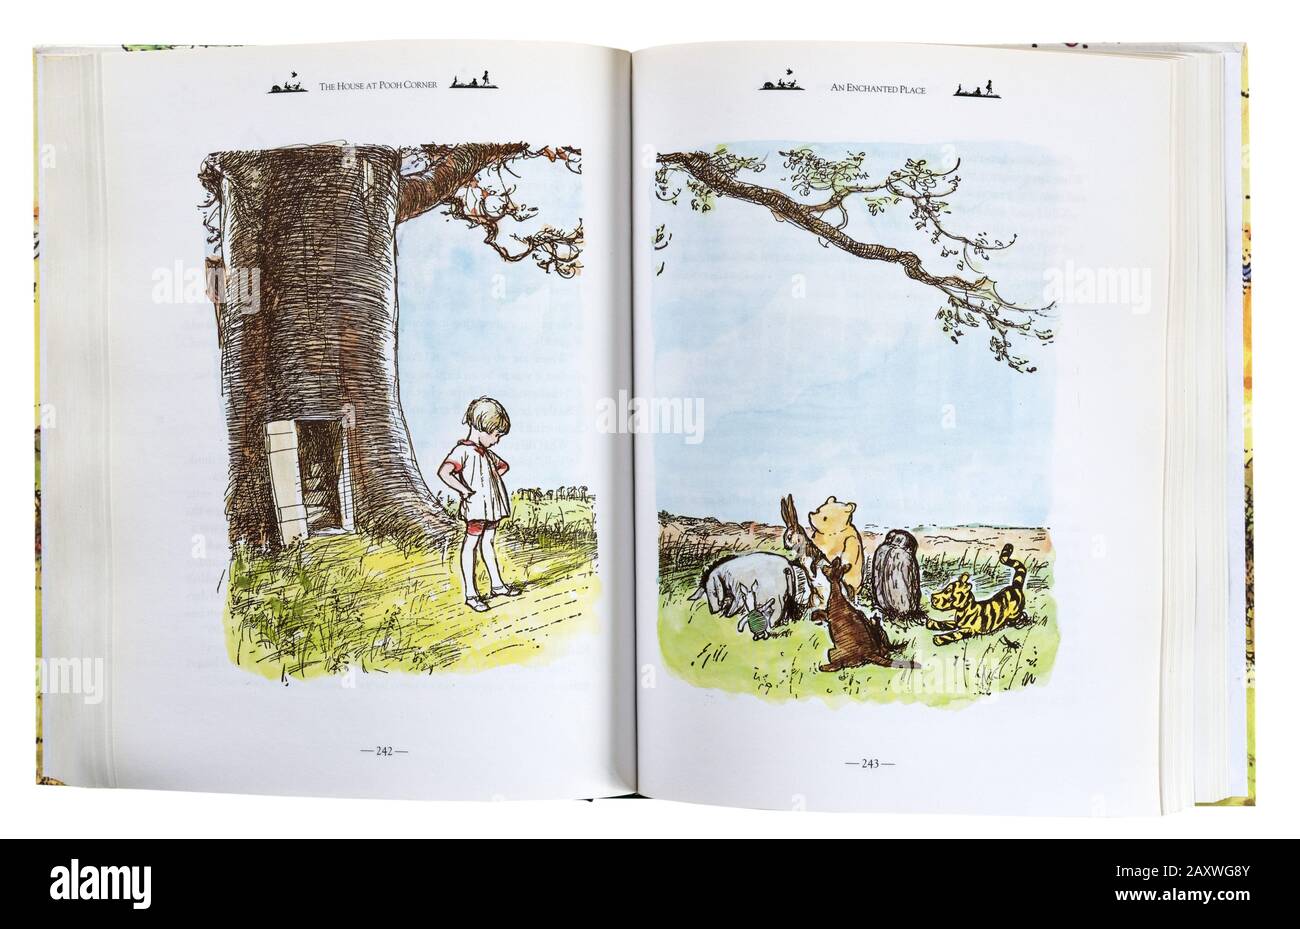 An illustration of Christopher Robin and Pooh with Eeyore, Kanga and Roo, Tigger, Owl, Rabbit and Piglet by EH Shepherd in a Winnie the Pooh collectio Stock Photo